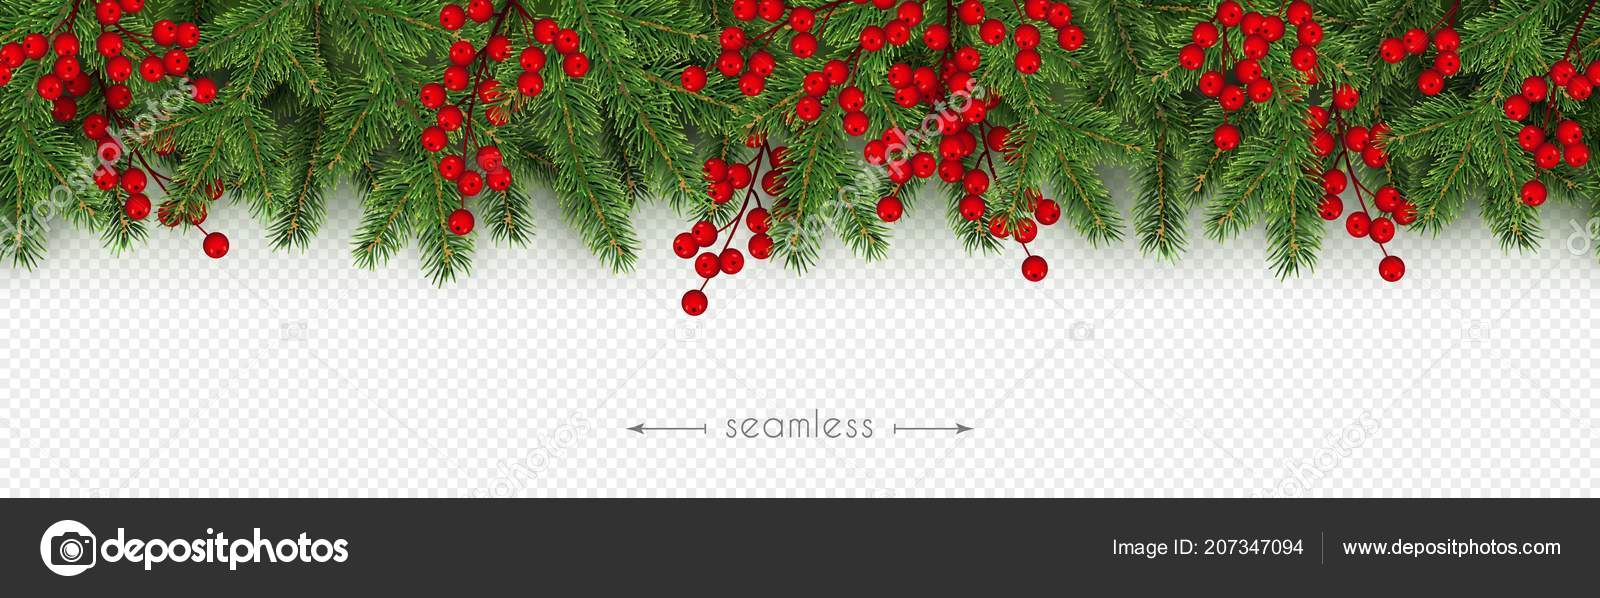 Christmas decoration holly berry branches isolated on white background, Stock vector